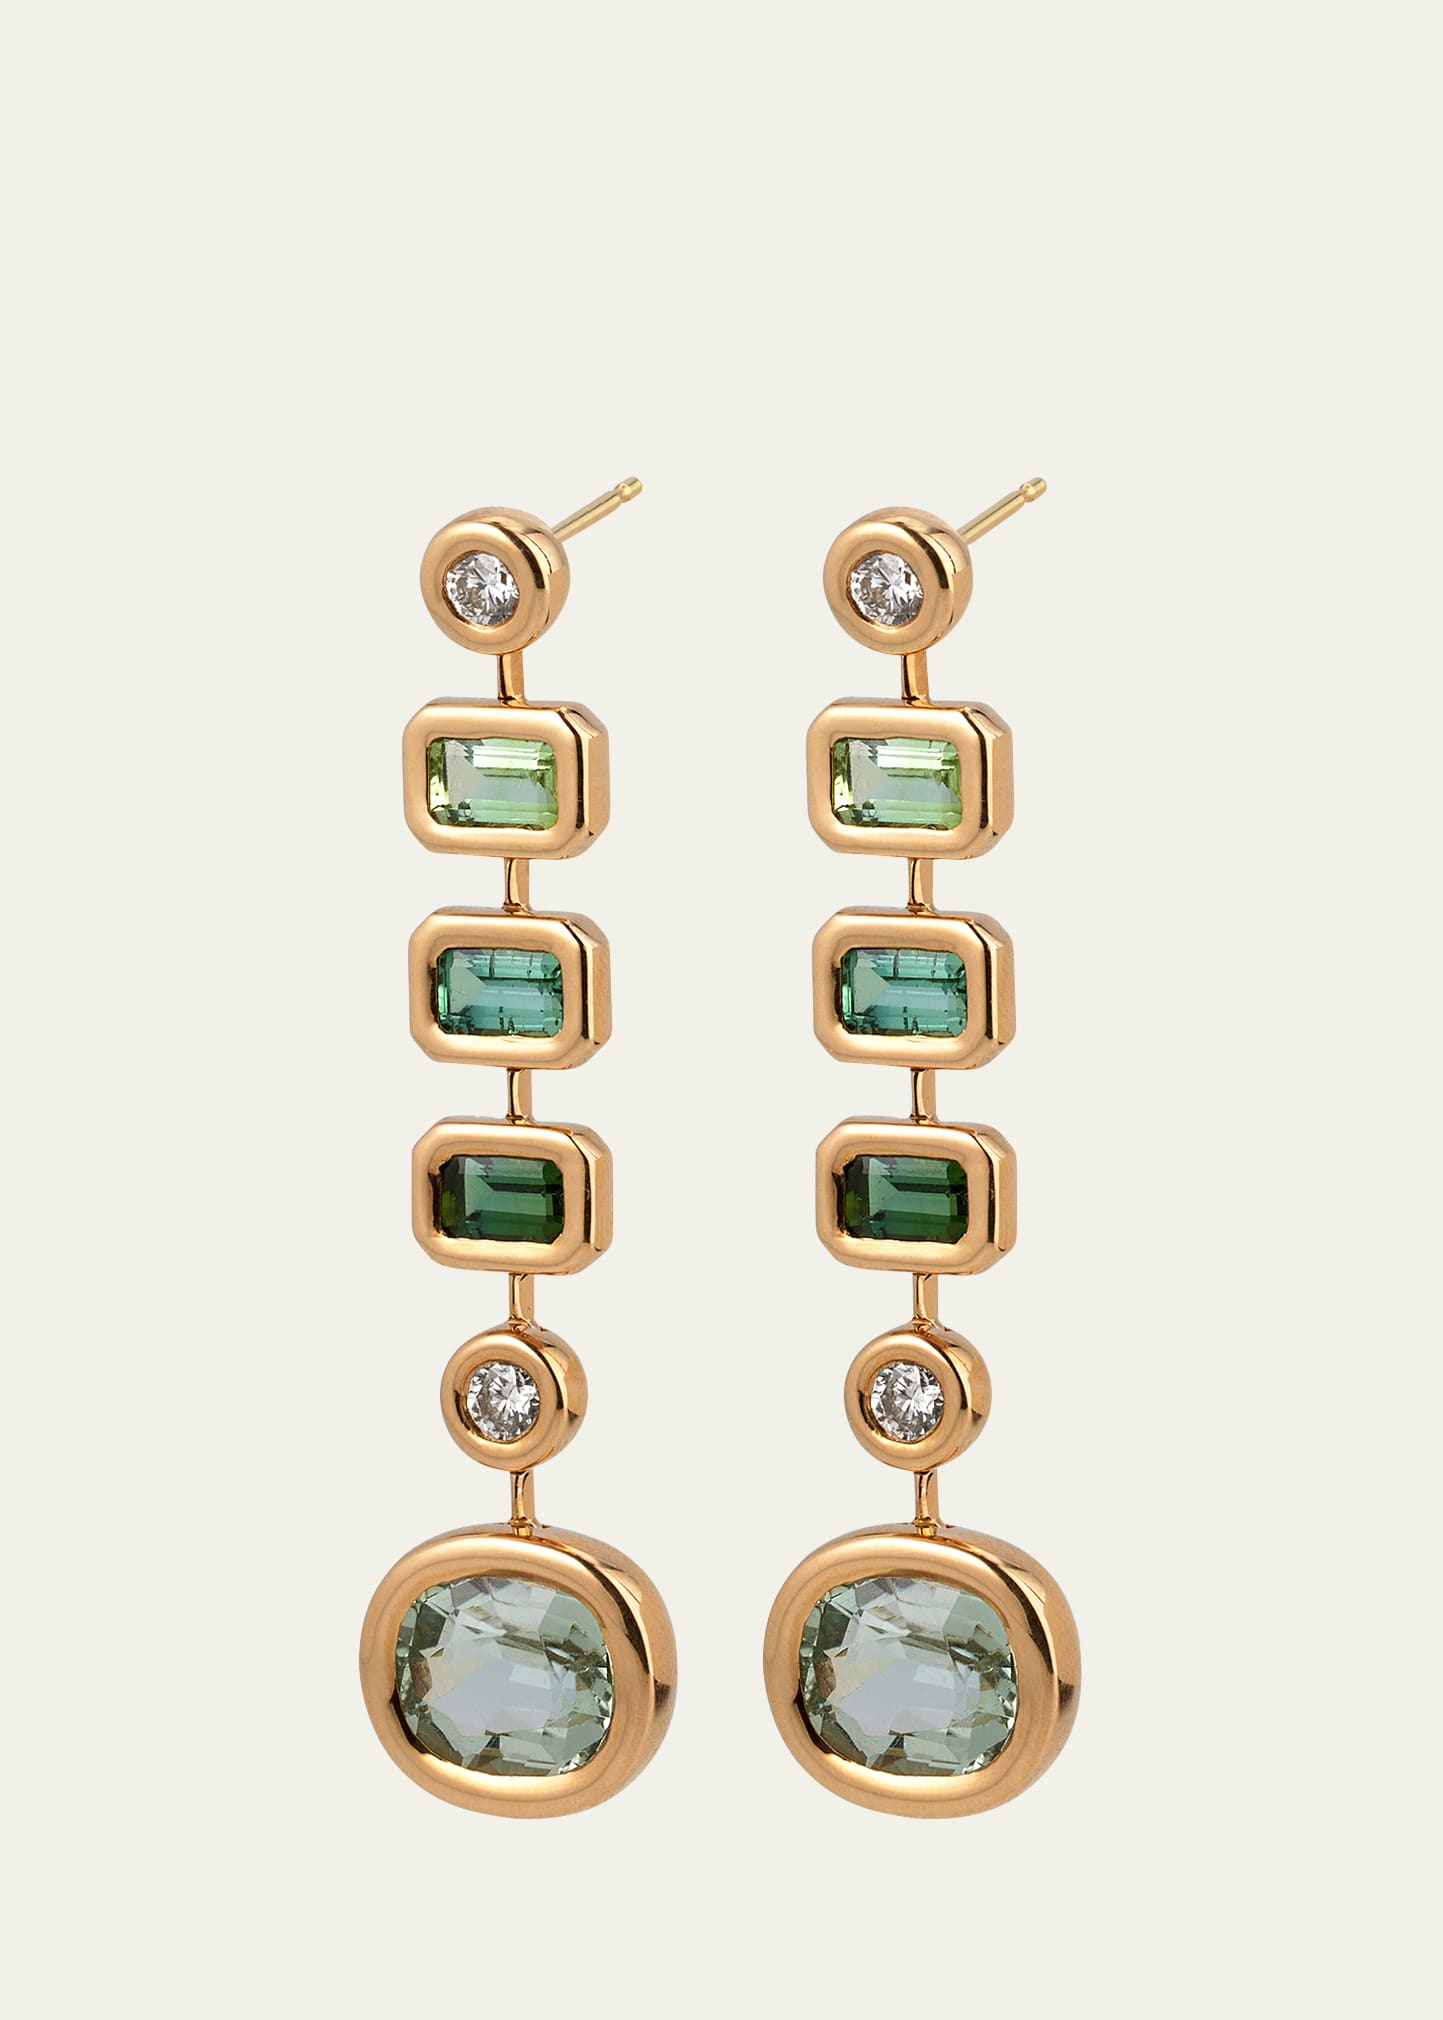 One-of-a-Kind Pillow Drop Earrings with Green Stones